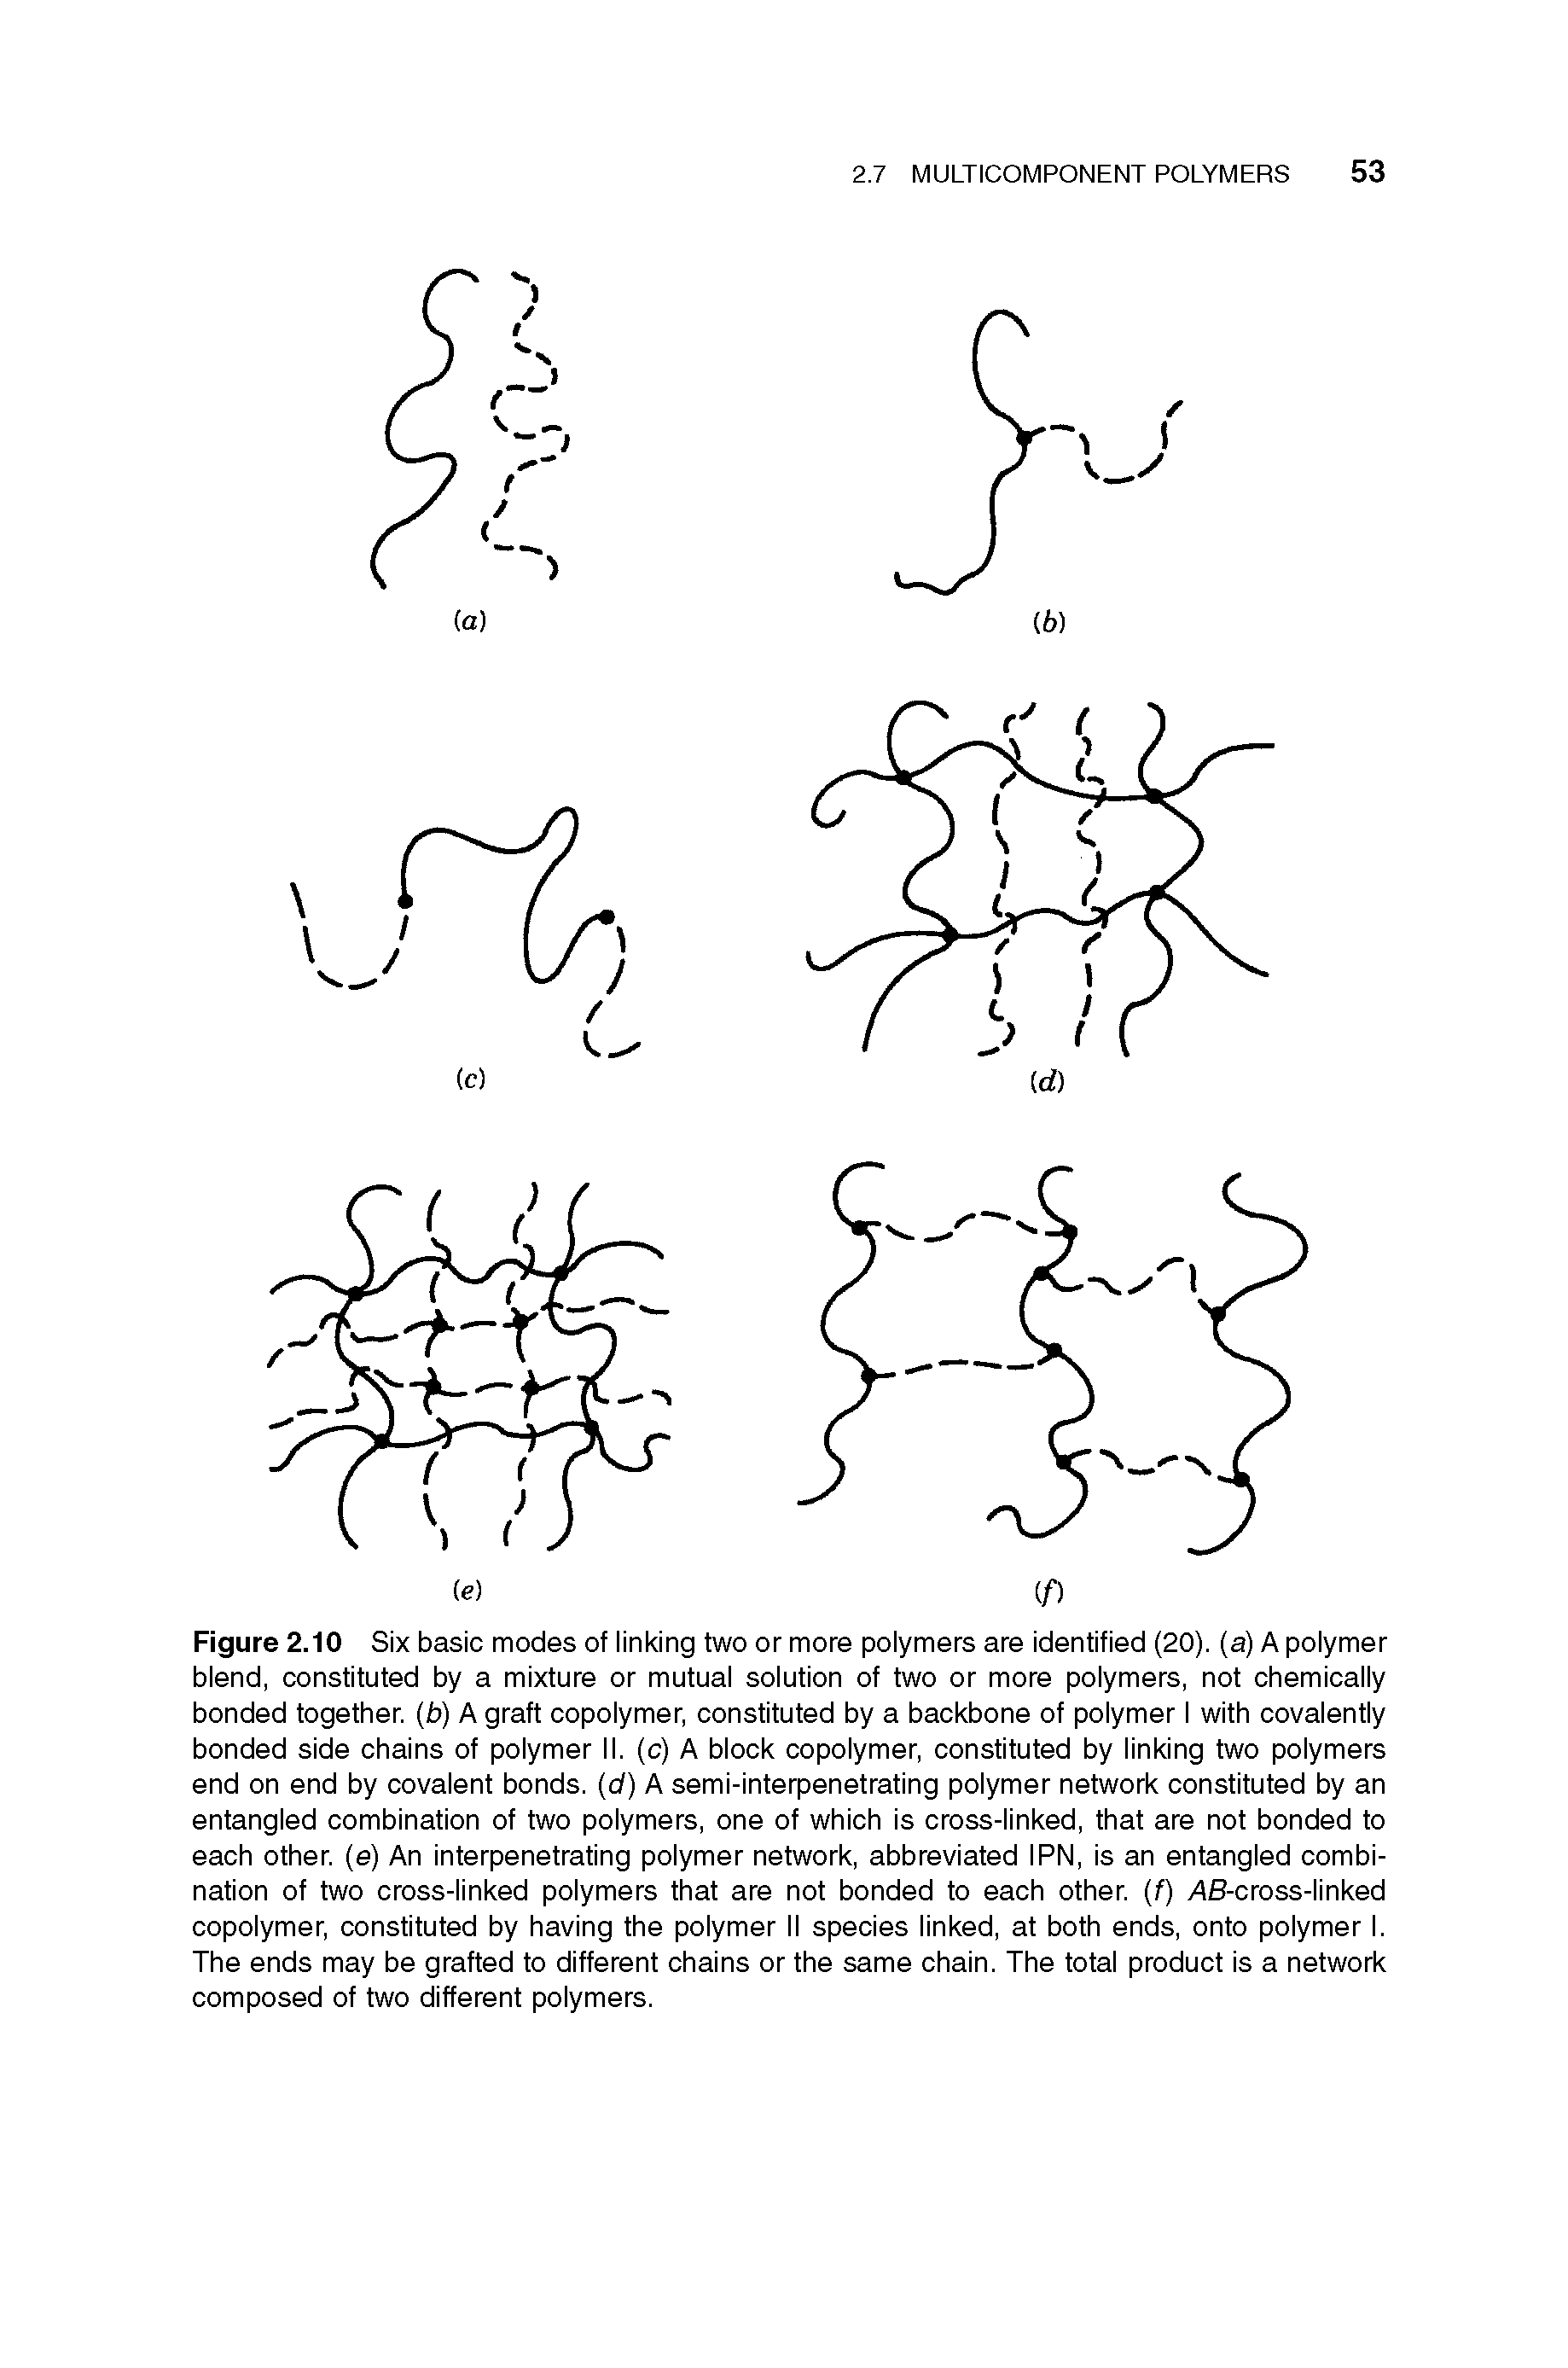 Figure 2.10 Six basic modes of linking two or more polymers are identified (20). (a) A polymer blend, constituted by a mixture or mutual solution of two or more polymers, not chemically bonded together, (b) A graft copolymer, constituted by a backbone of polymer I with covalently bonded side chains of polymer II. (c) A block copolymer, constituted by linking two polymers end on end by covalent bonds, (d) A semi-interpenetrating polymer network constituted by an entangled combination of two polymers, one of which is cross-linked, that are not bonded to each other, (e) An interpenetrating polymer network, abbreviated IPN, is an entangled combination of two cross-linked polymers that are not bonded to each other, (f) AS-cross-linked copolymer, constituted by having the polymer II species linked, at both ends, onto polymer I. The ends may be grafted to different chains or the same chain. The total product is a network composed of two different polymers.